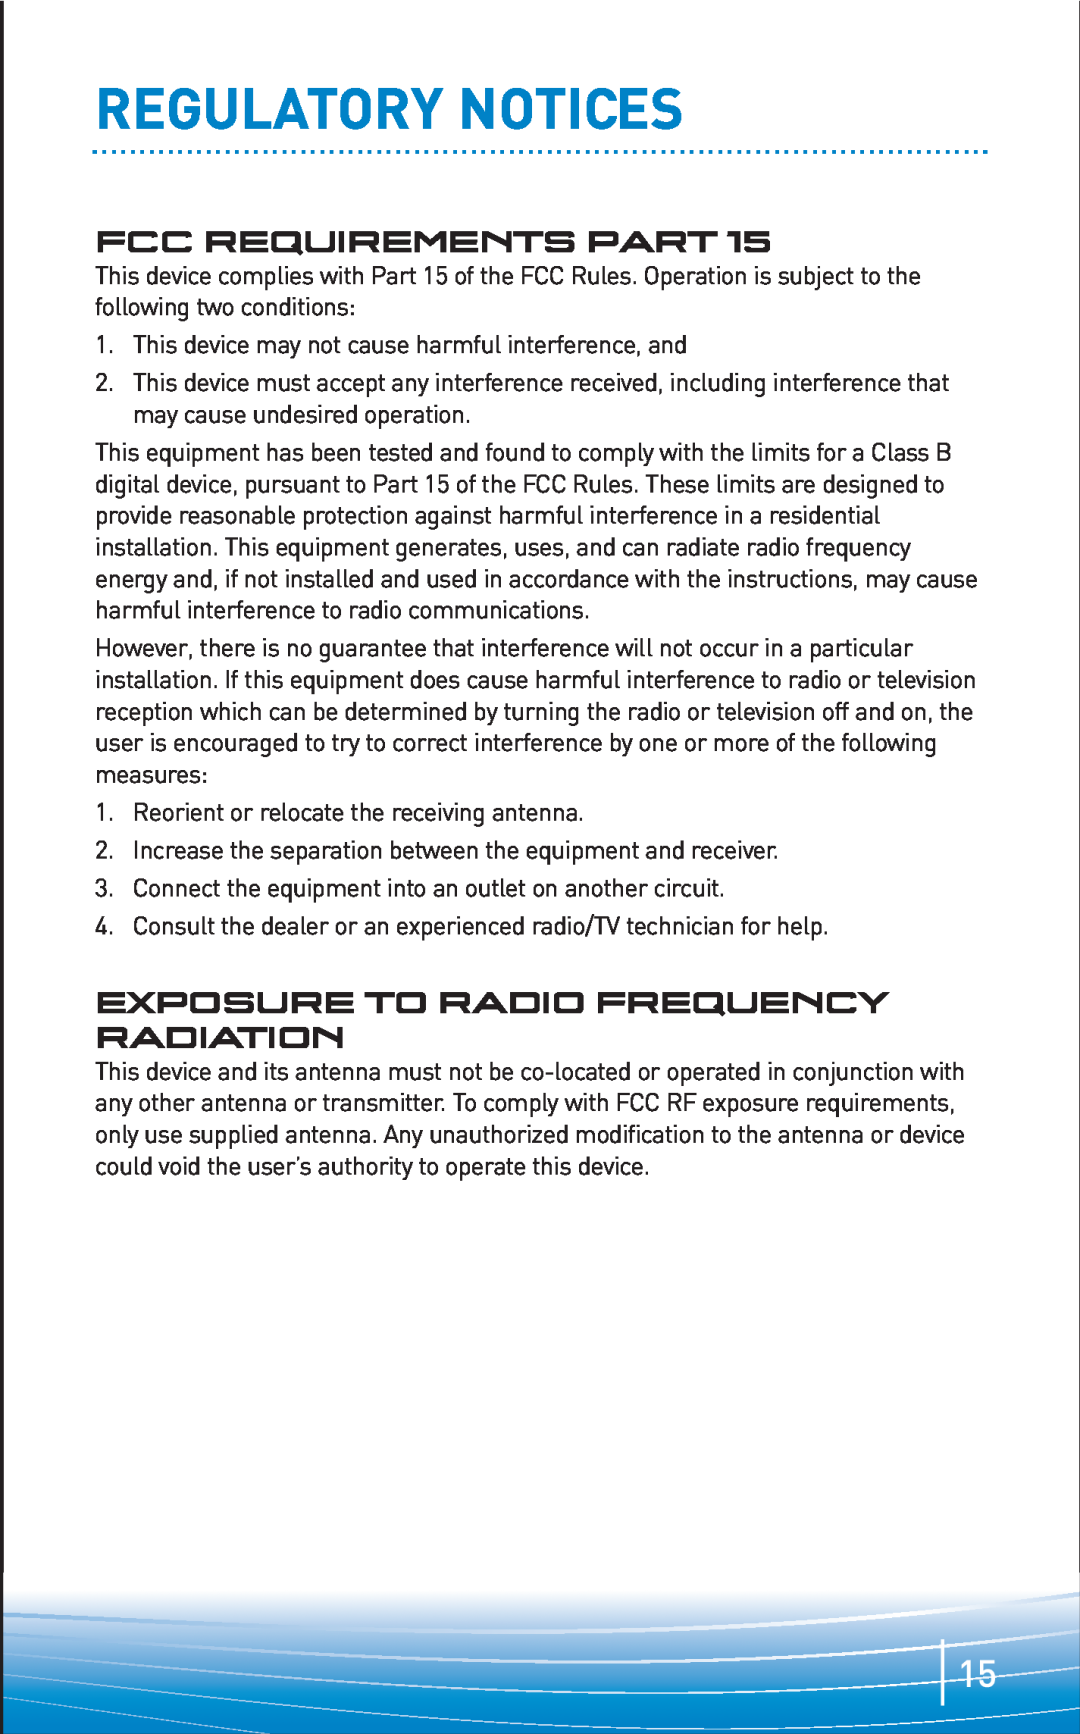 Plantronics 645 manual Regulatory Notices, Fcc Requirements Part, Exposure To Radio Frequency Radiation 